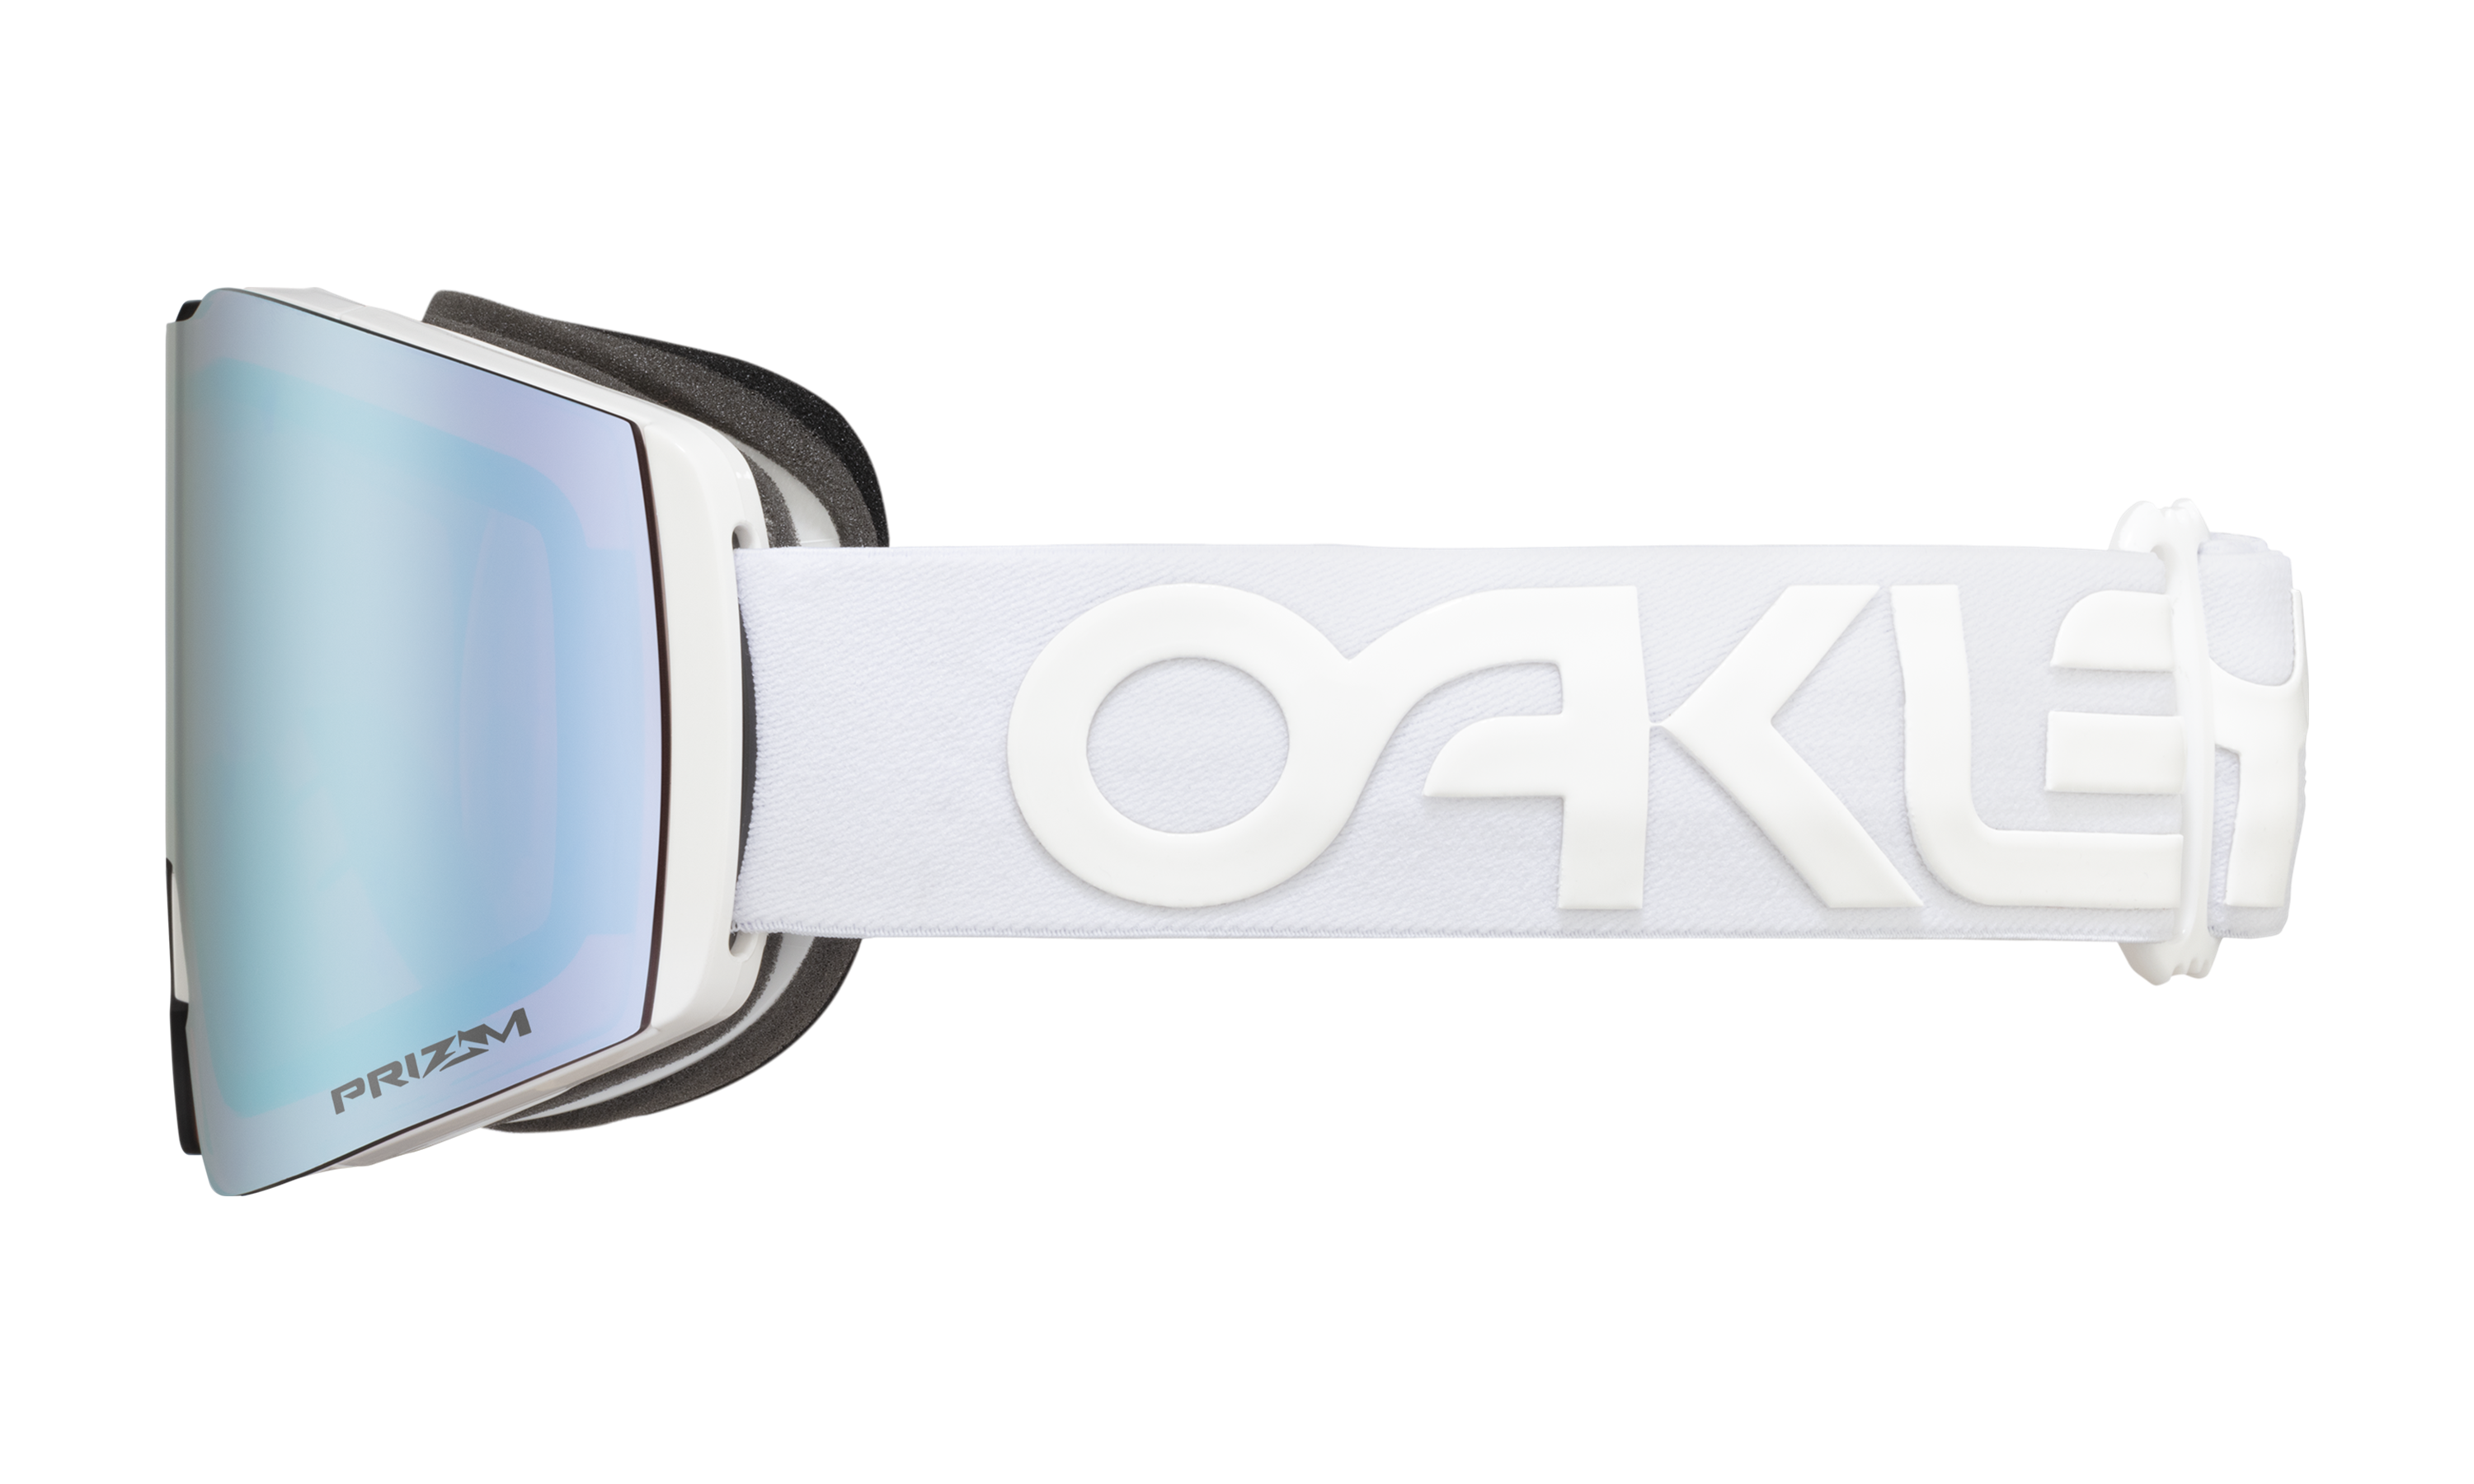 fall line factory pilot whiteout snow goggle